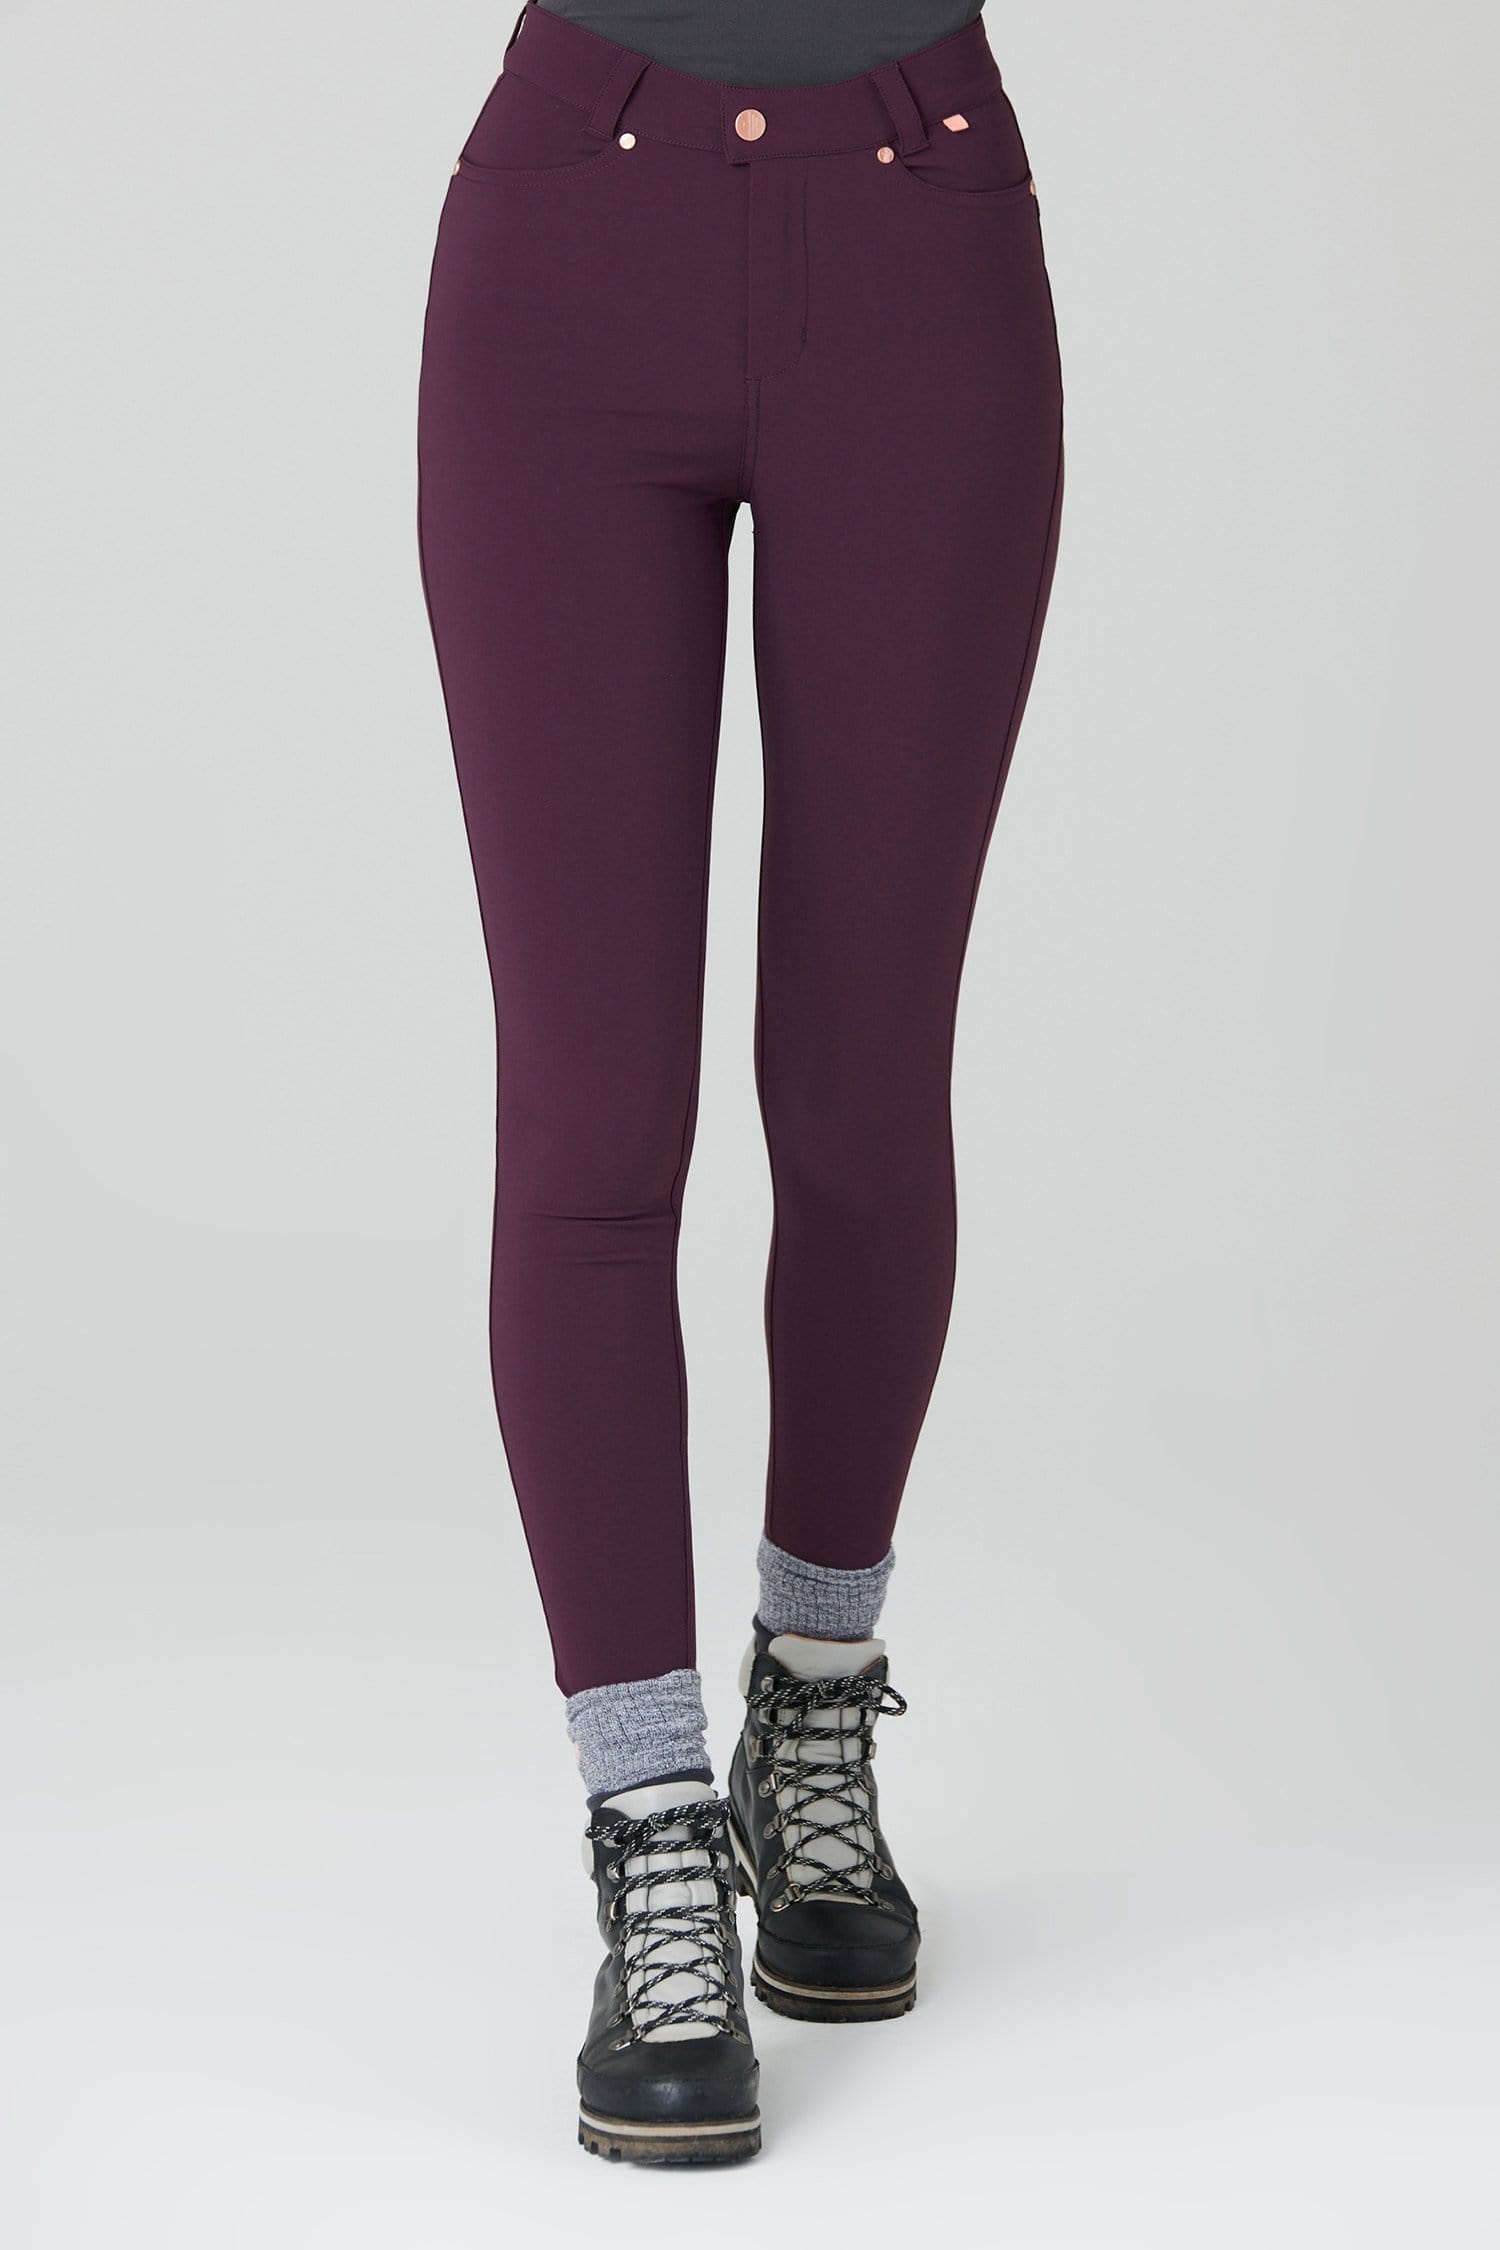 Max Stretch Skinny Outdoor Trousers - Aubergine - 26r / Uk8 - Womens - Acai Outdoorwear